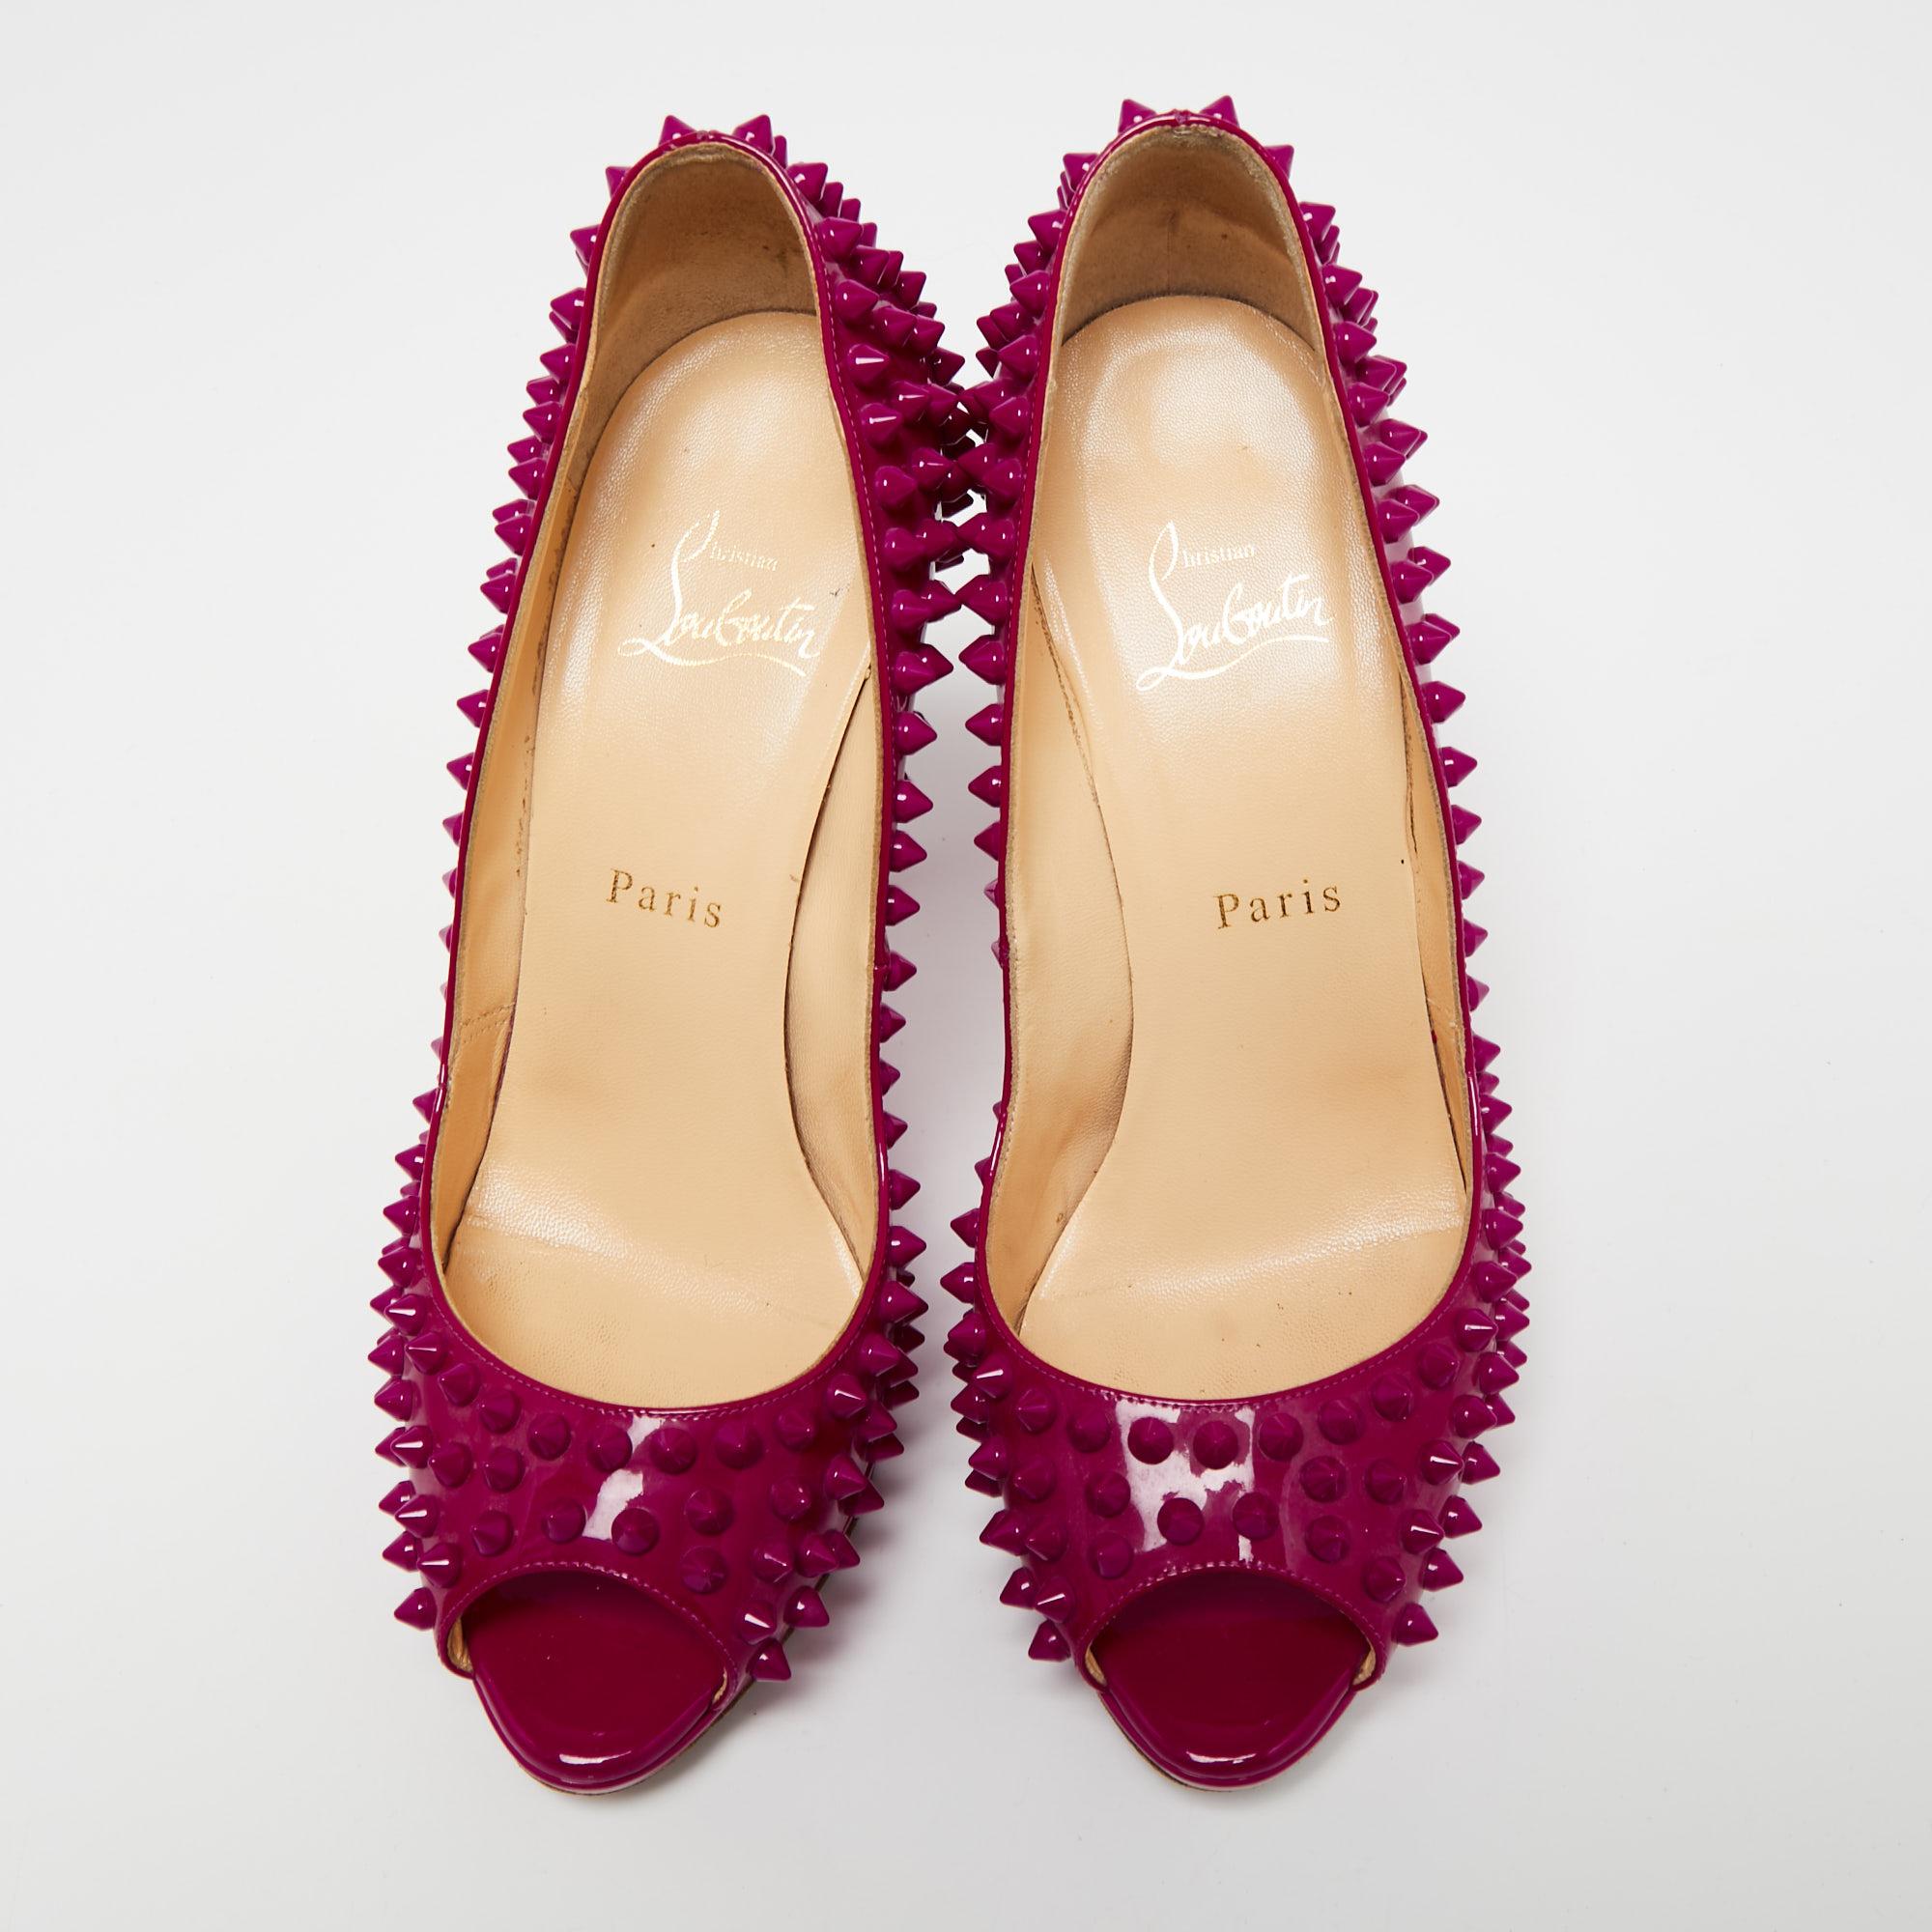 Christian Louboutin Patent Leather Yolanda Spiked Peep-Toe Pumps Size 38.5 In Good Condition For Sale In Dubai, Al Qouz 2